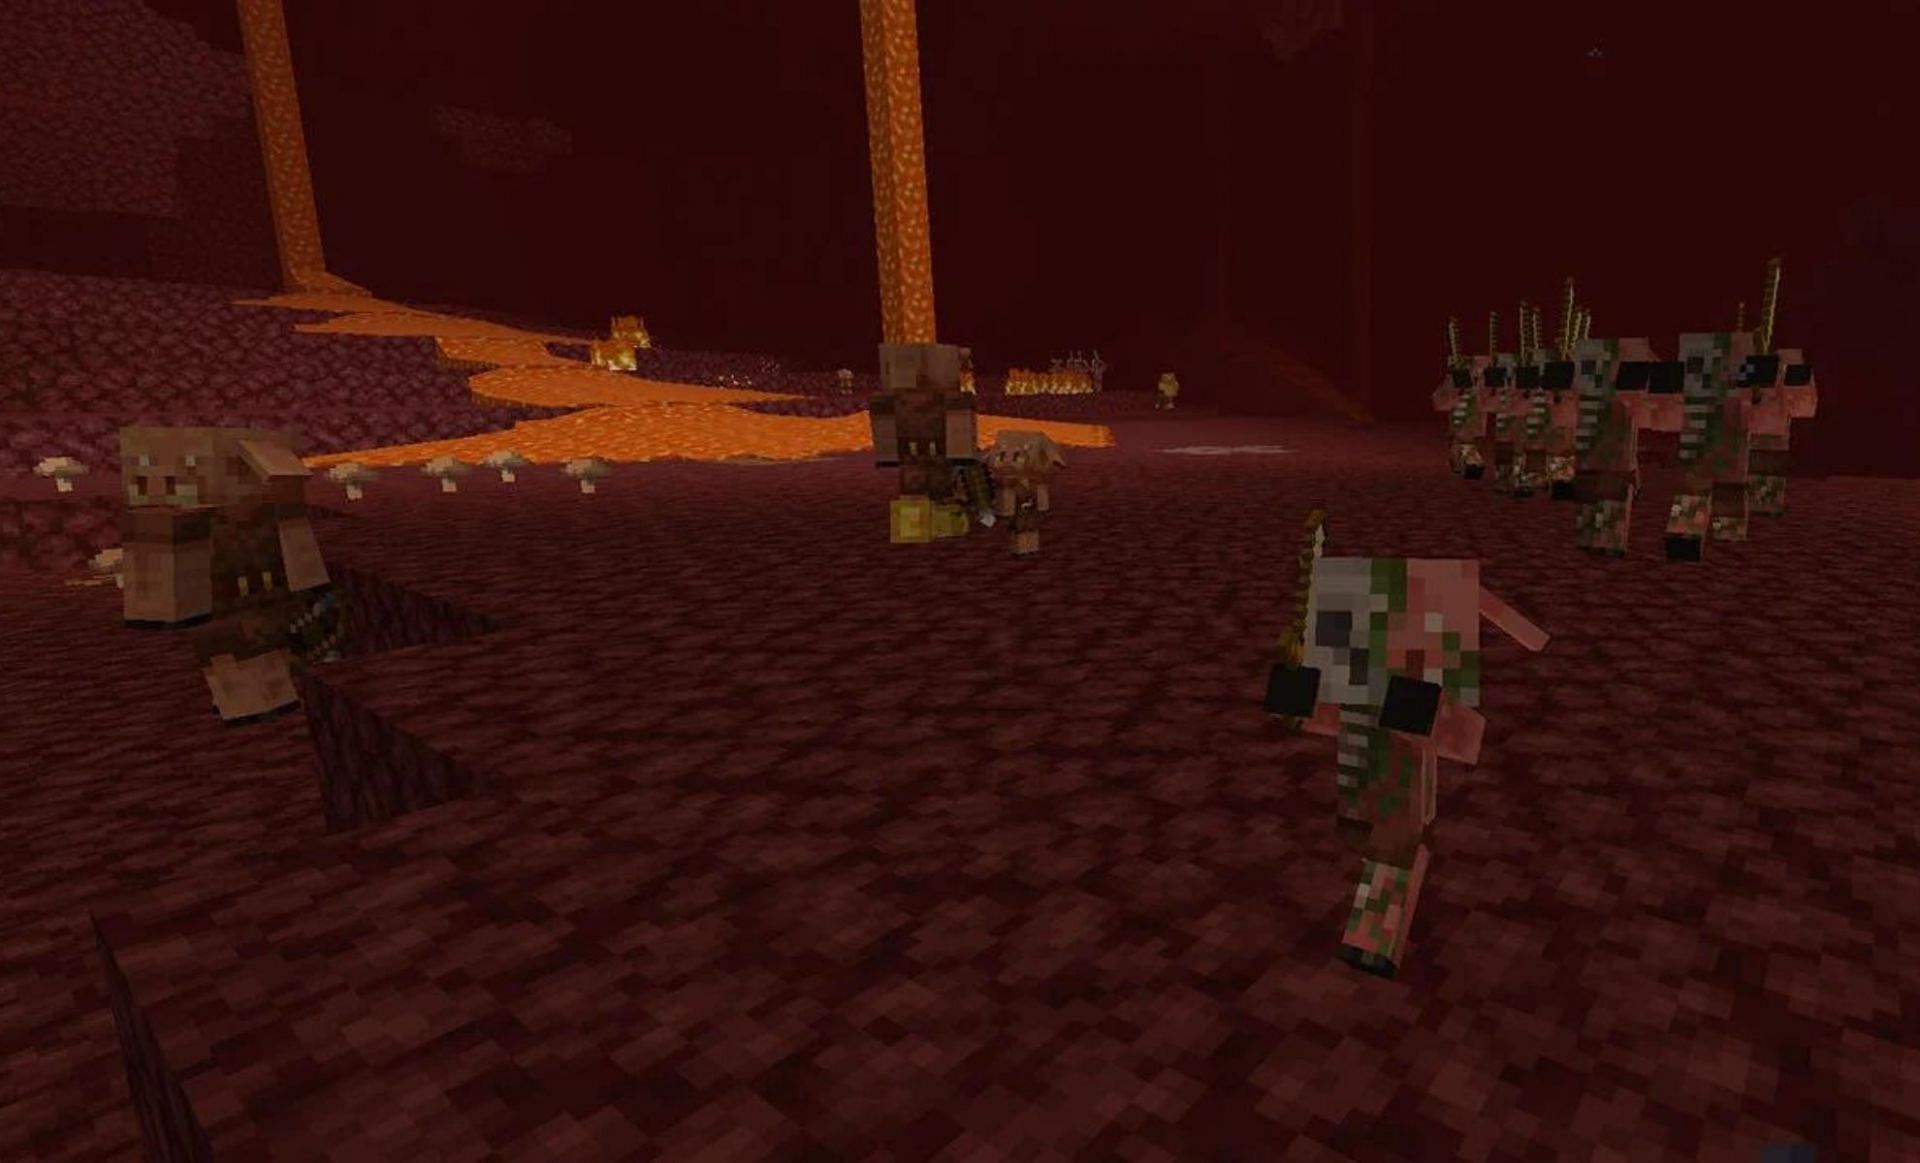 Which mobs need to be updated? (Image via Mojang)